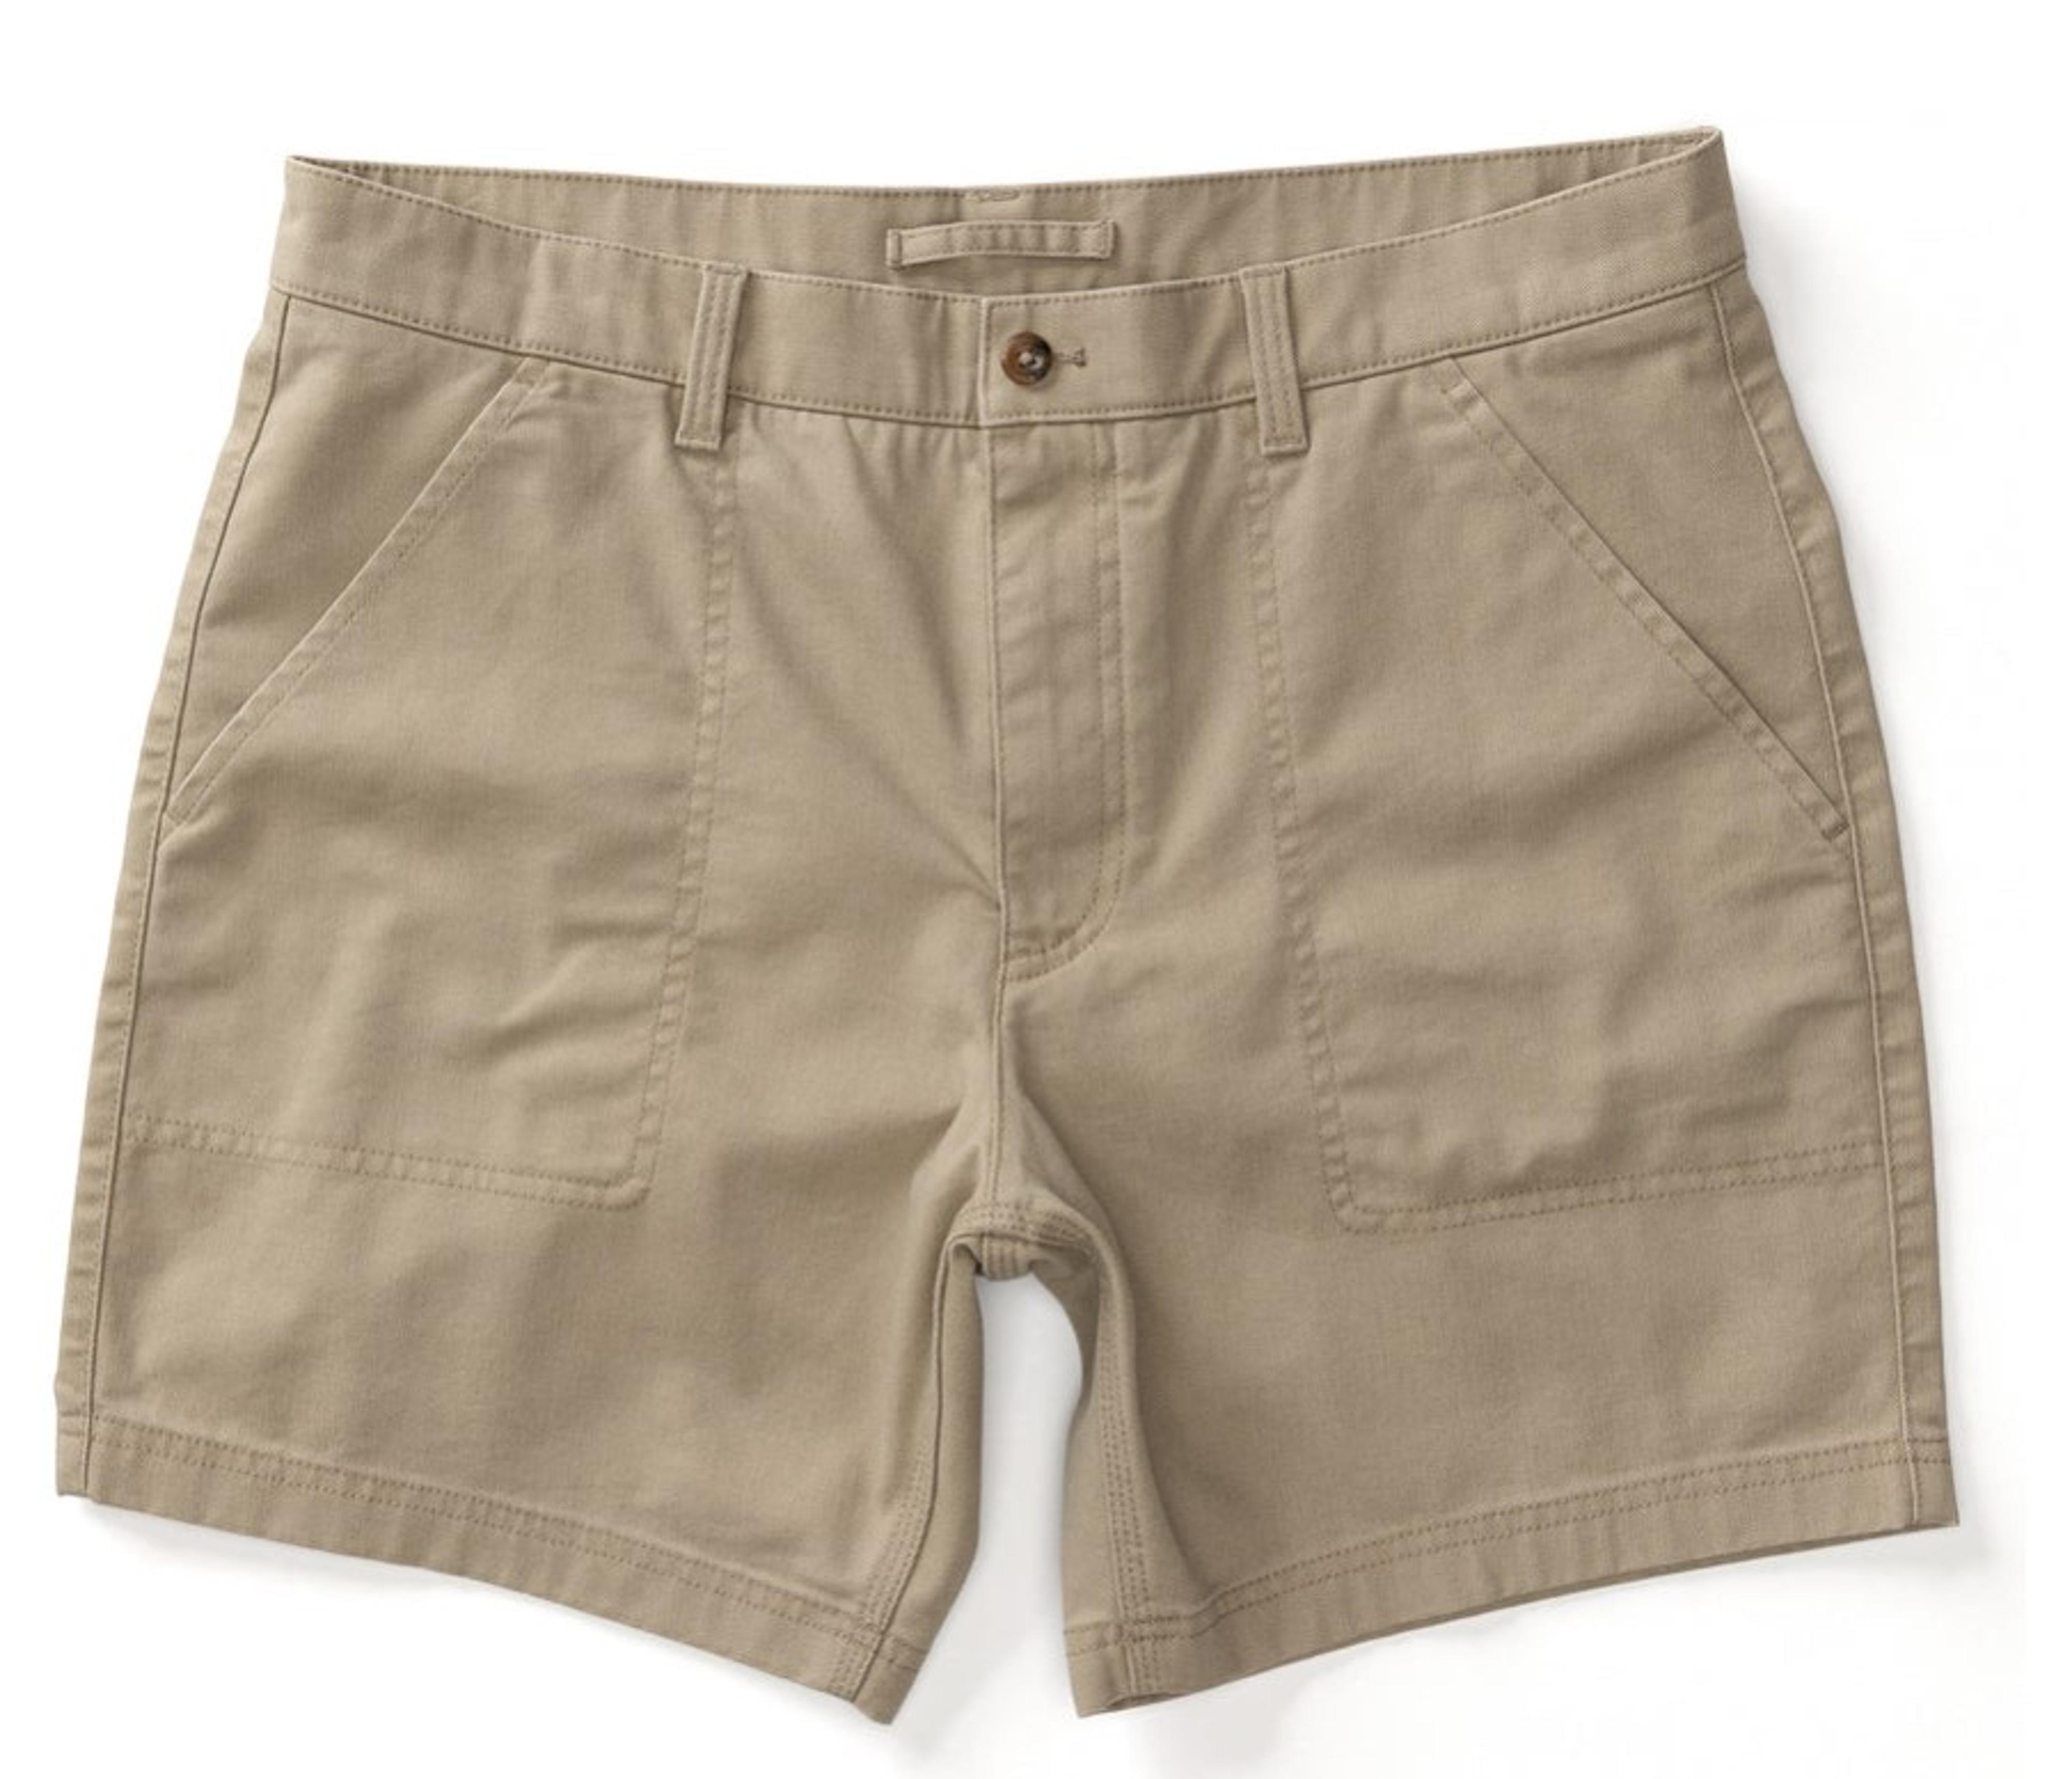  7in Field Canvas Camp Short